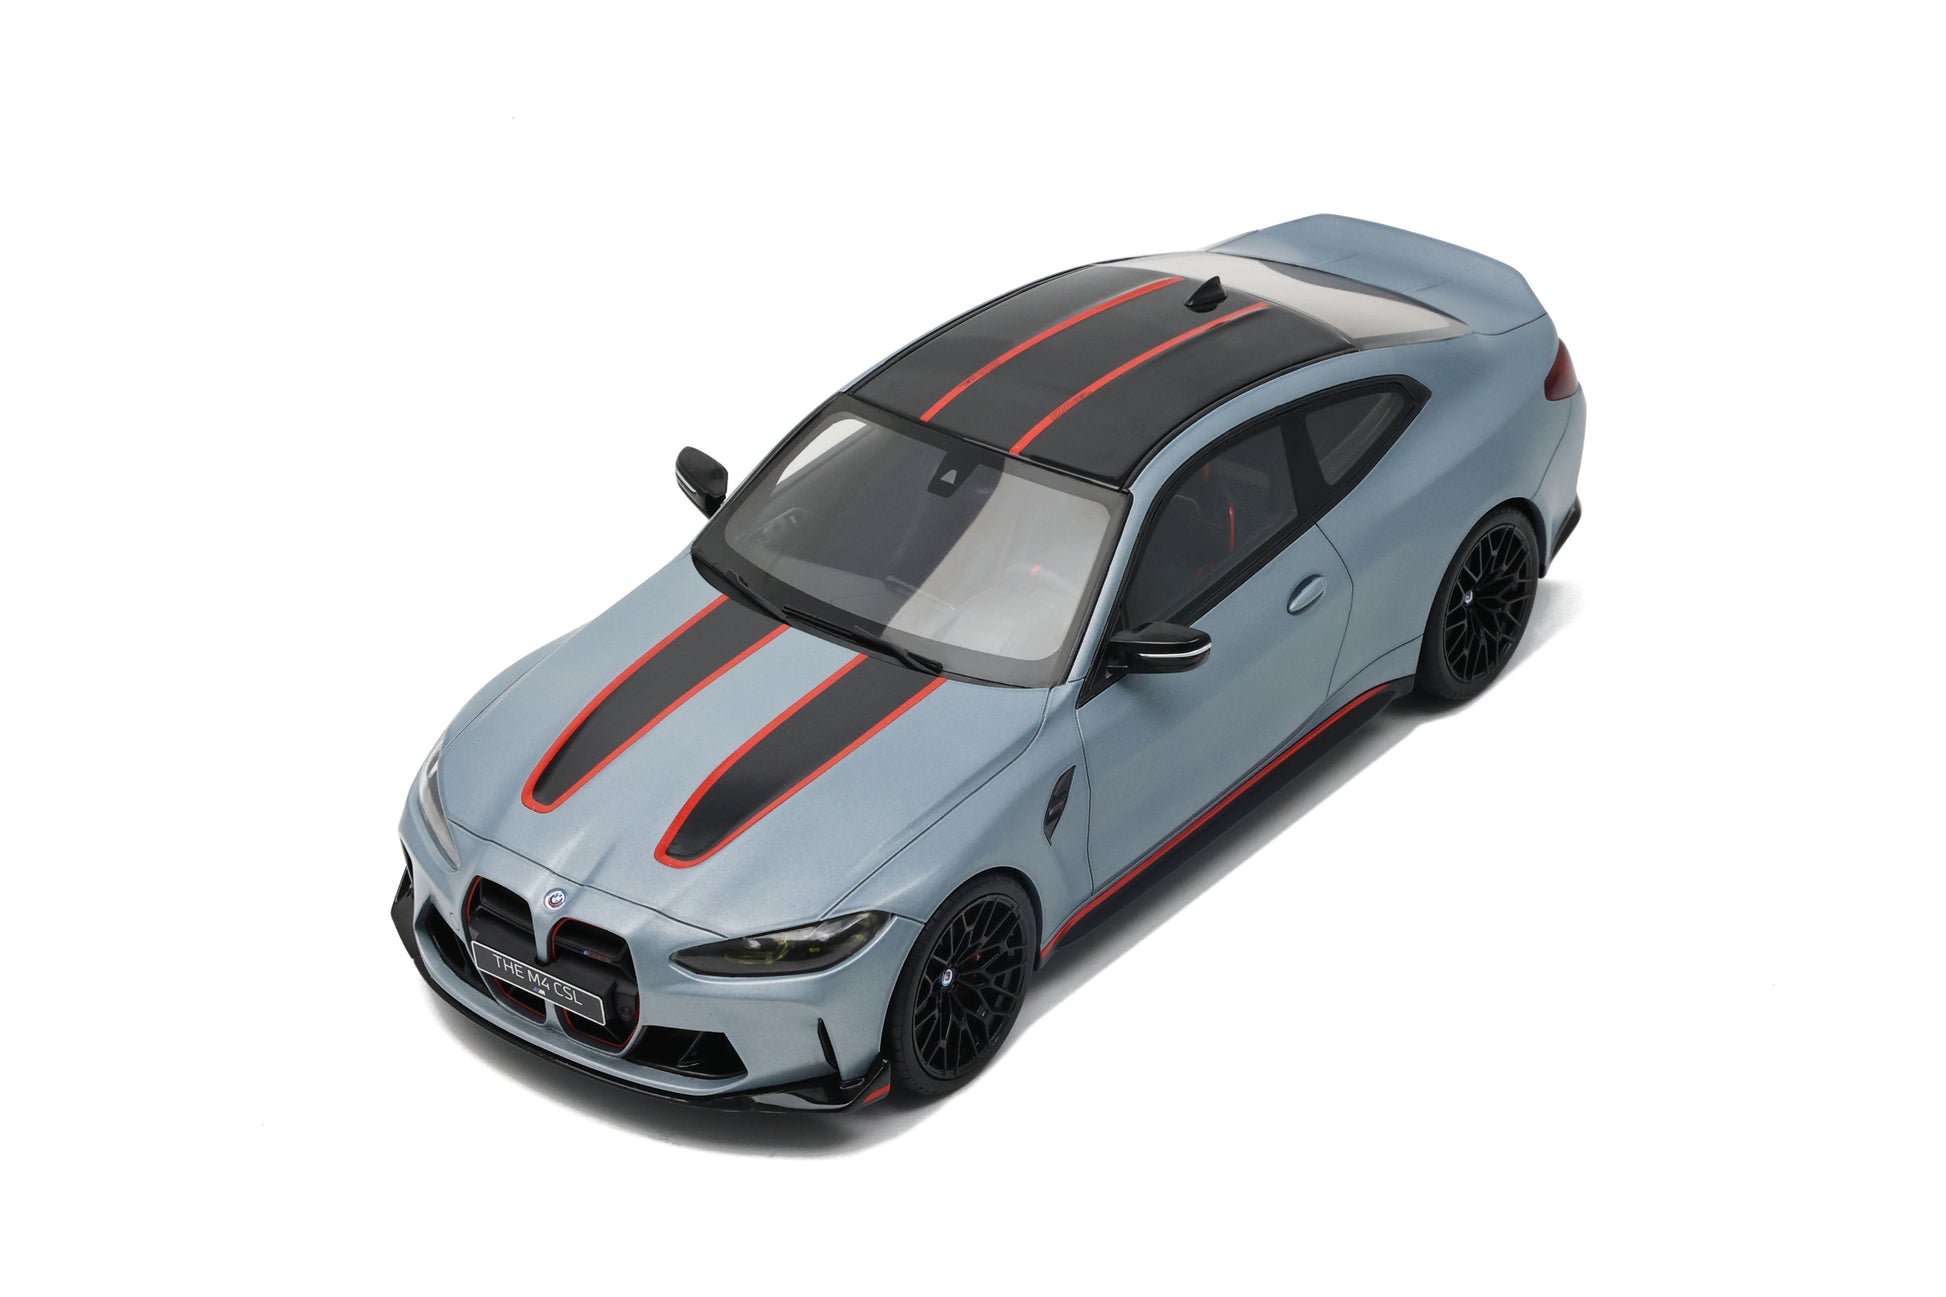 BMW M4 Competition (G82) - 1:43 Scale Model Car by TSM